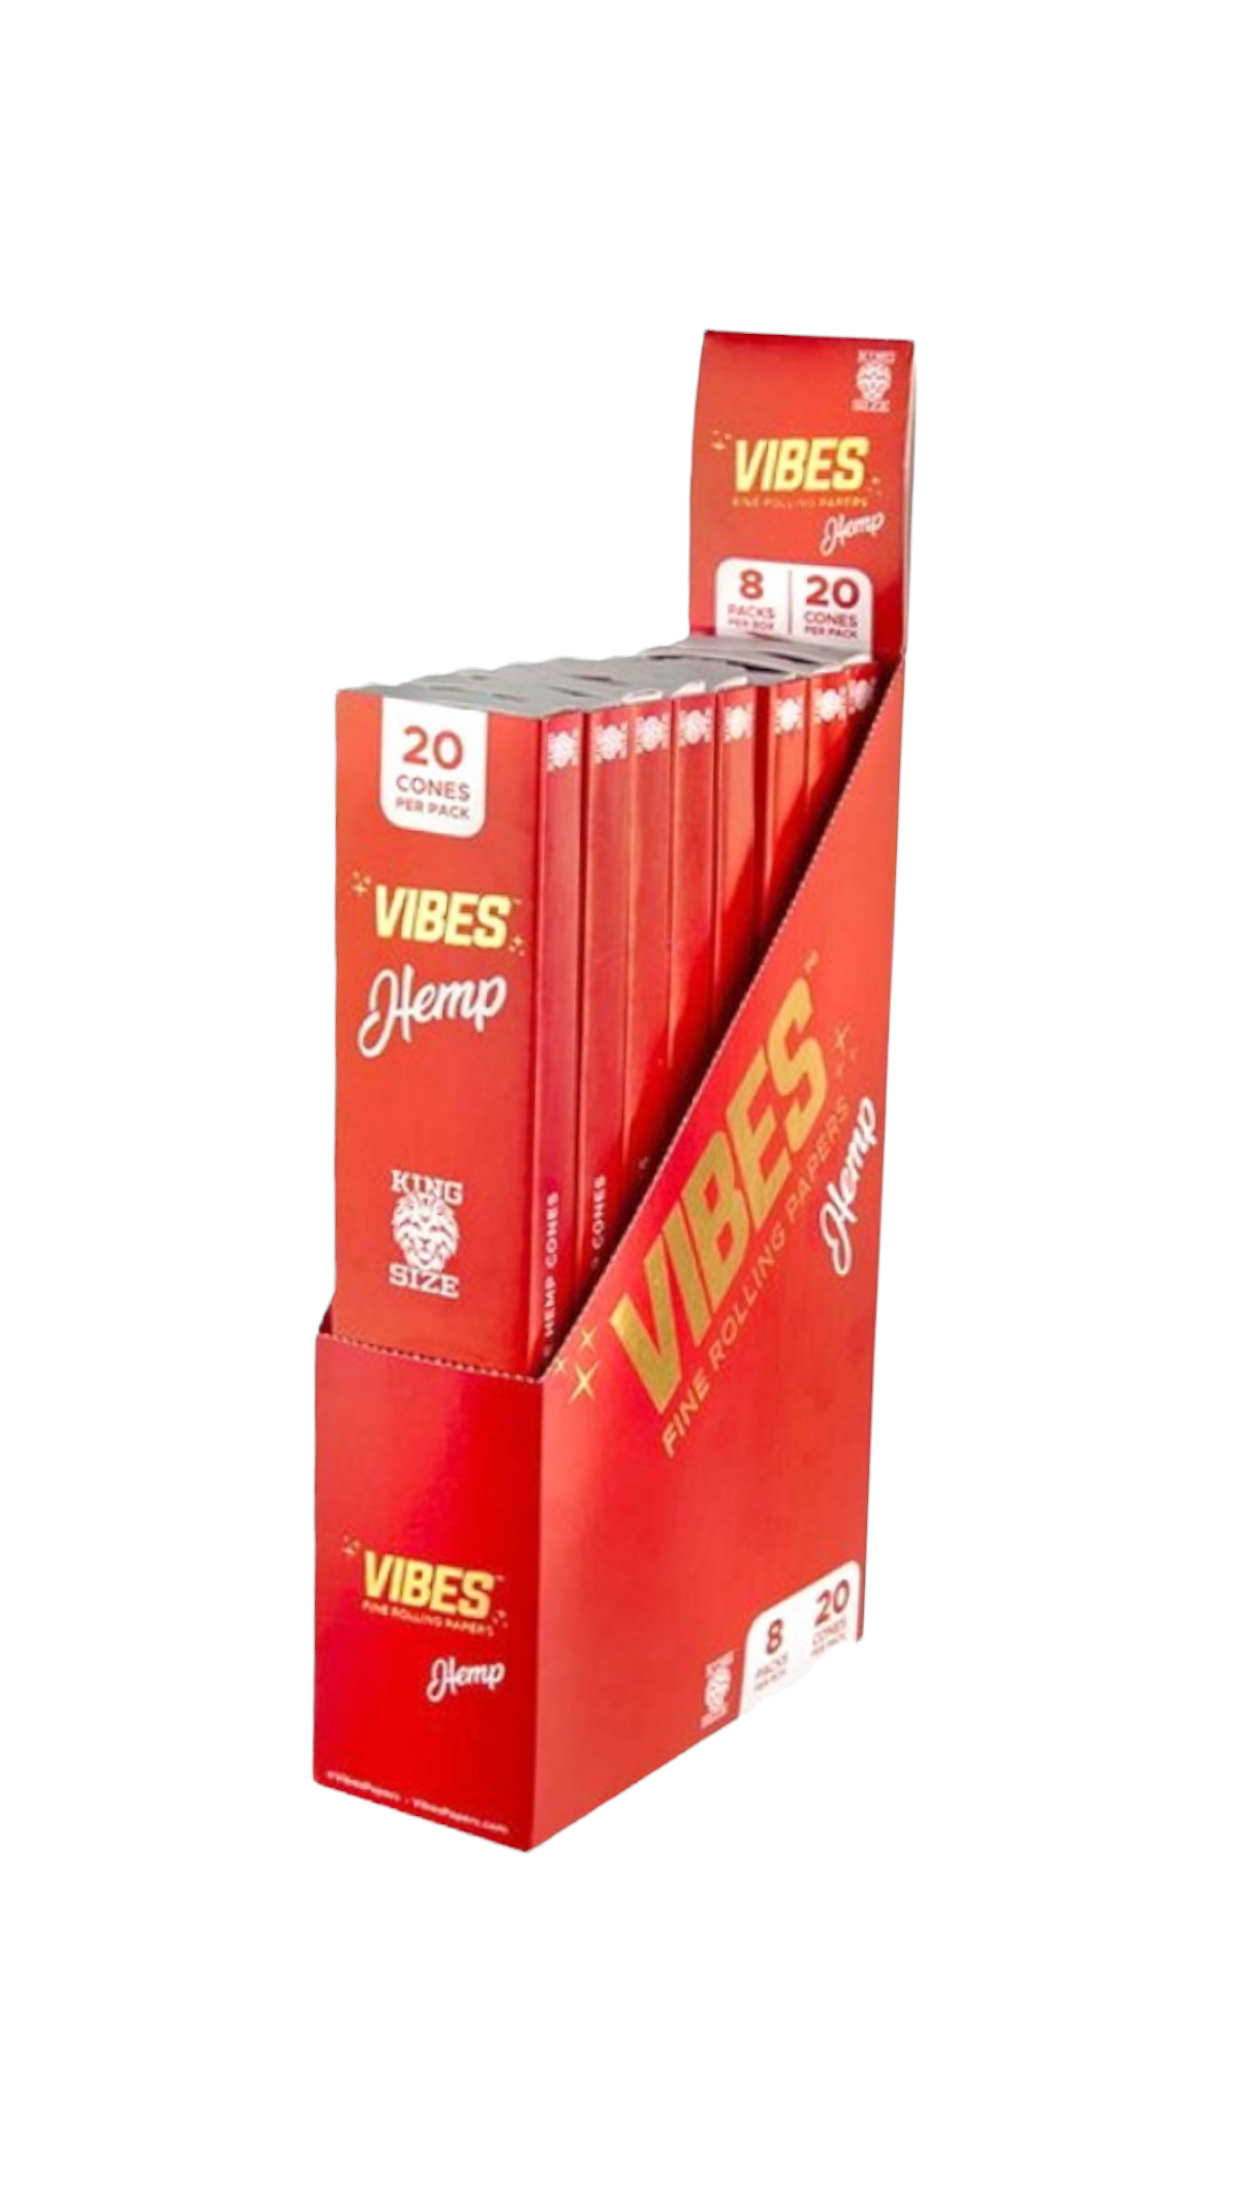 VIBES CONES HEMP | KING SIZE 8 COUNT